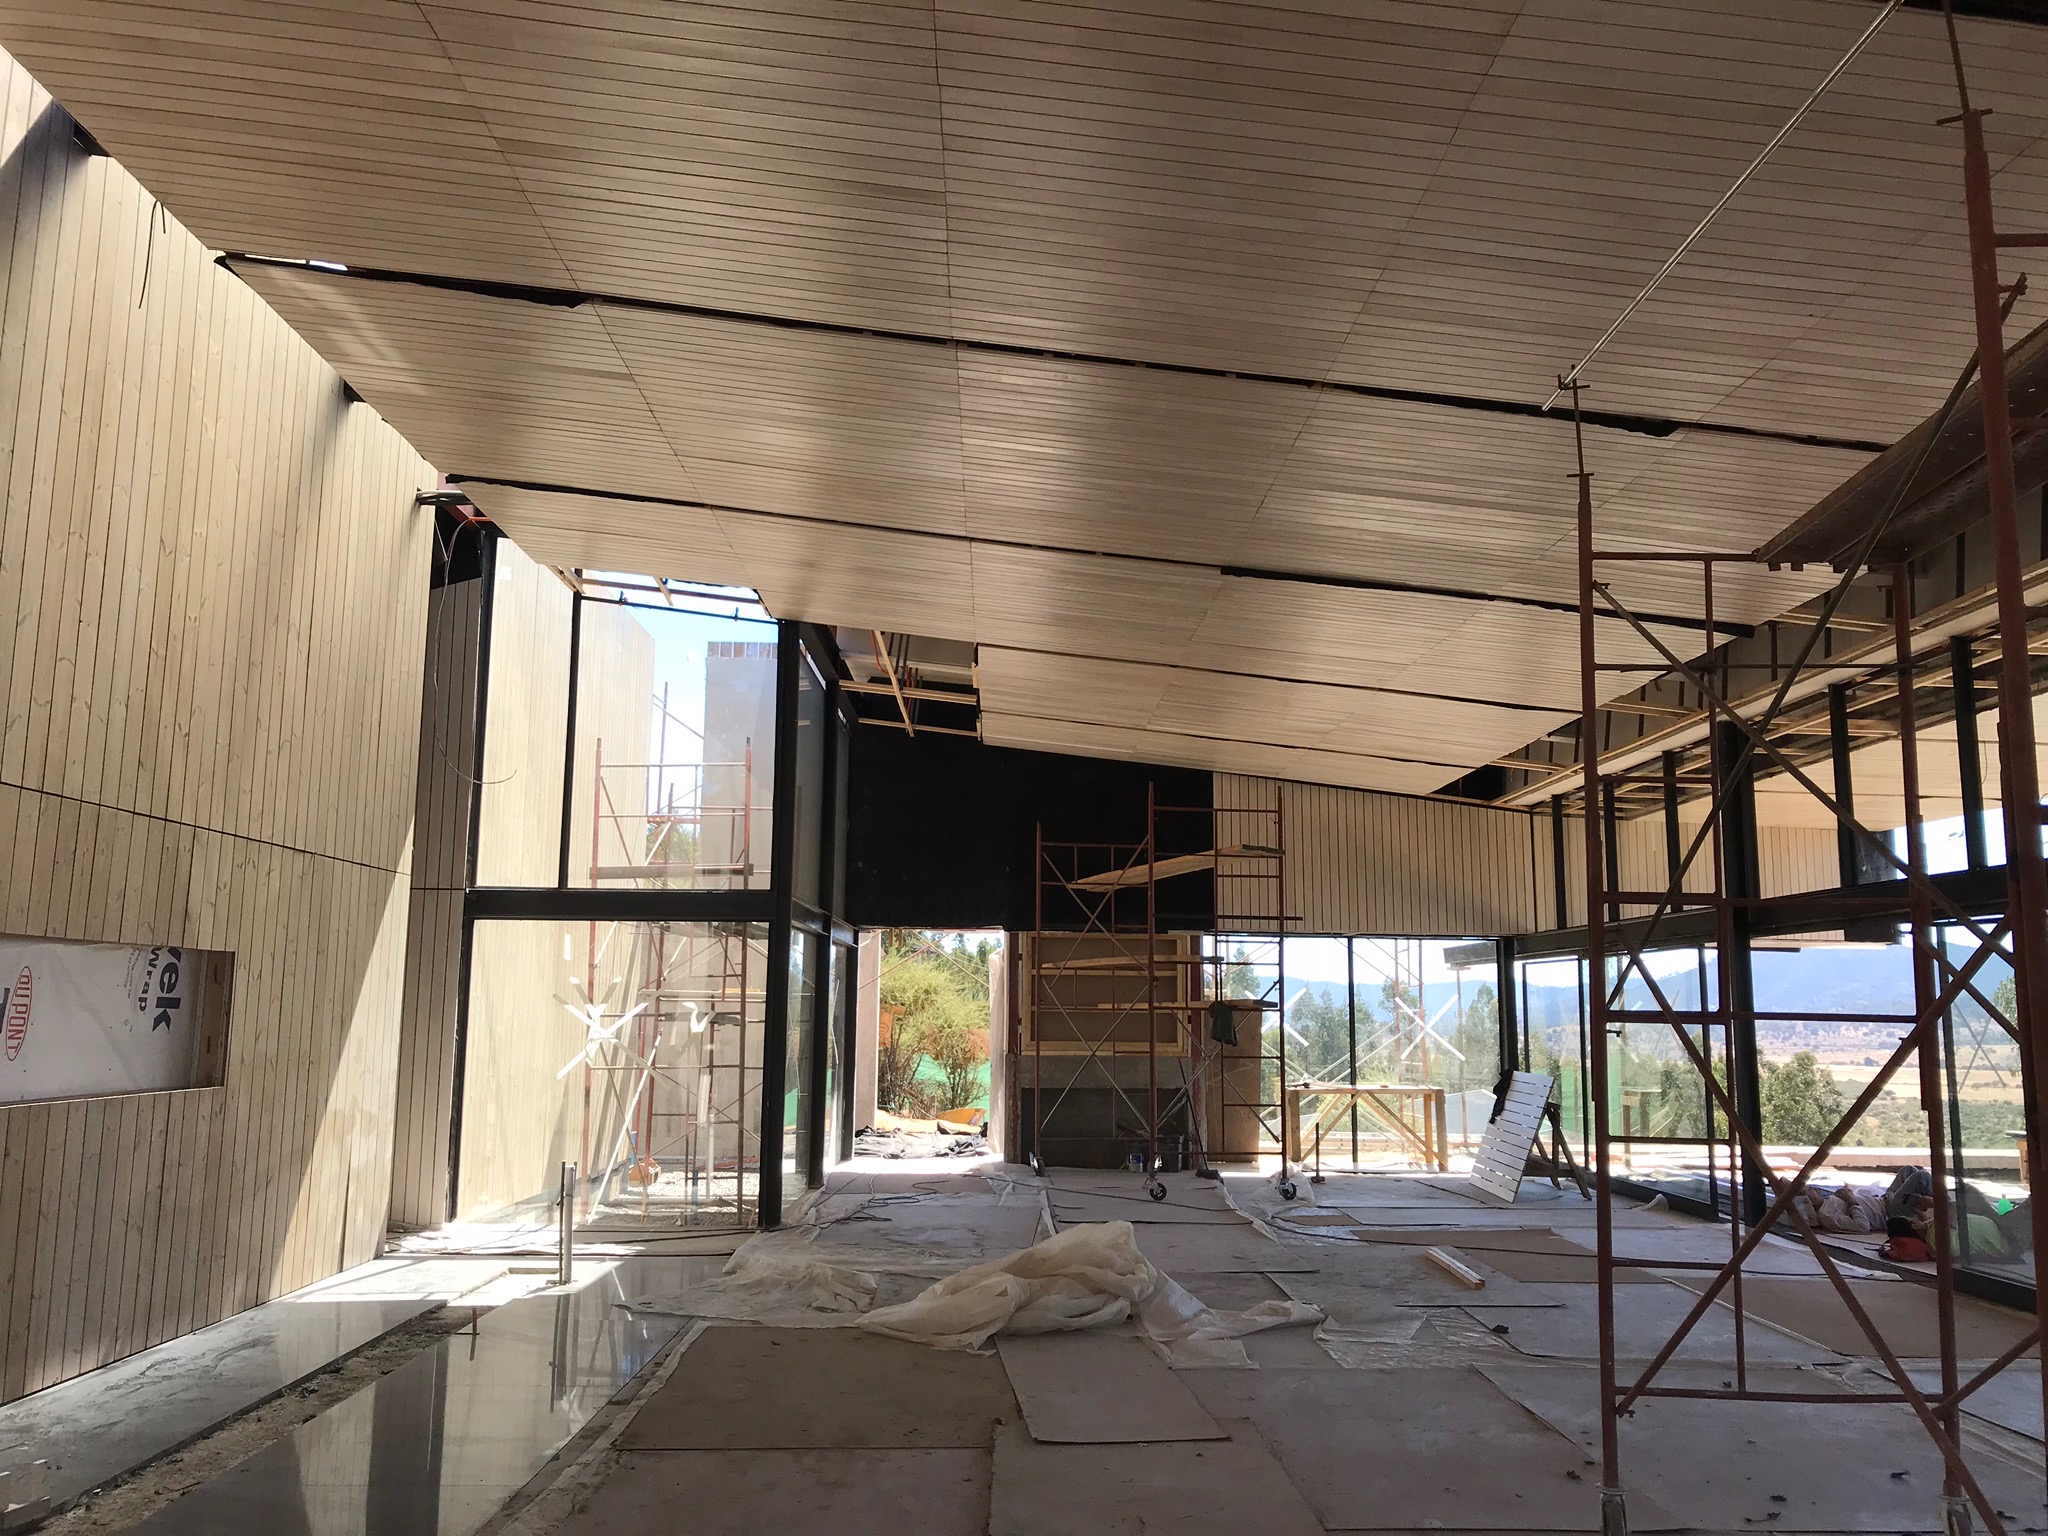 Inside our new tasting room. Sliding glass doors will open to a large, outdoor patio with panoramic views of the Andes.